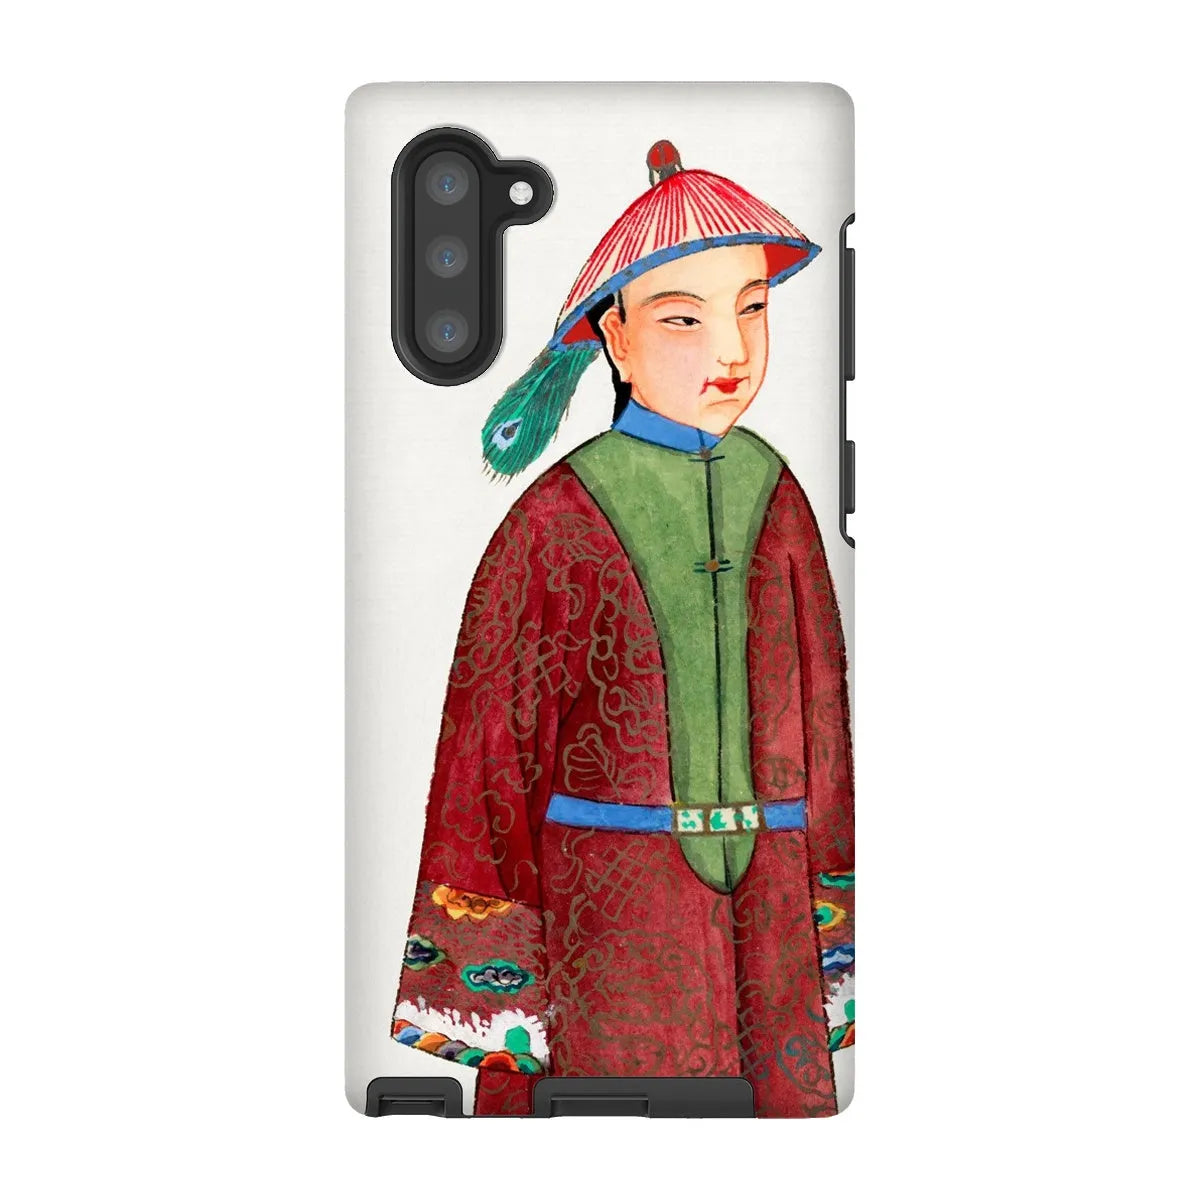 Manchu Dandy - Chinese Aesthetic Art Phone Case - Samsung Galaxy Note 10 / Matte - Mobile Phone Cases - Aesthetic Art